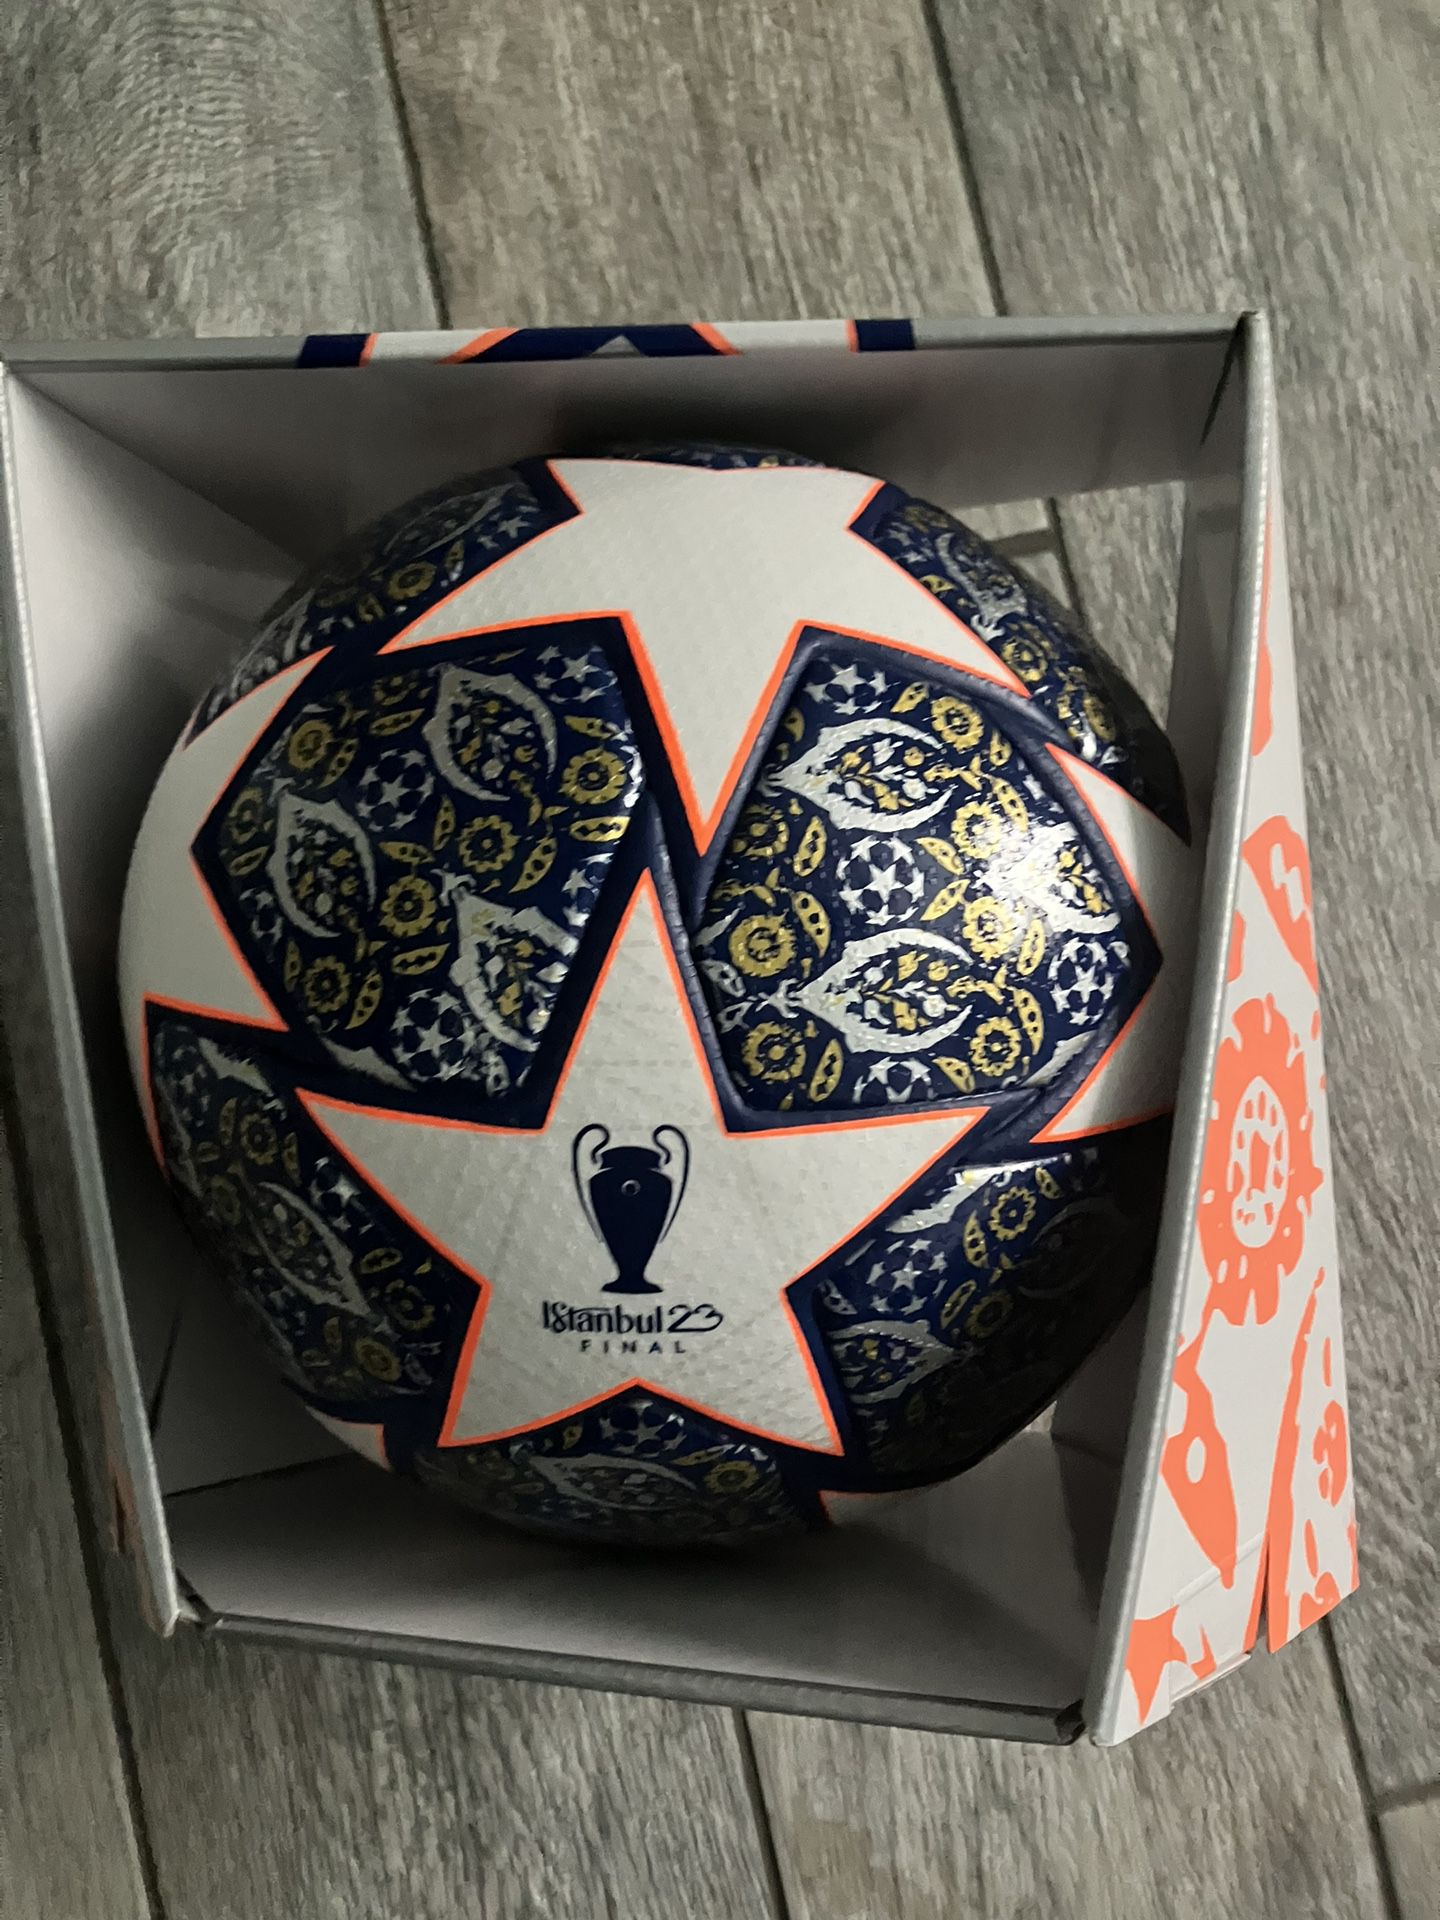 Soccer Ball UCL Champions League